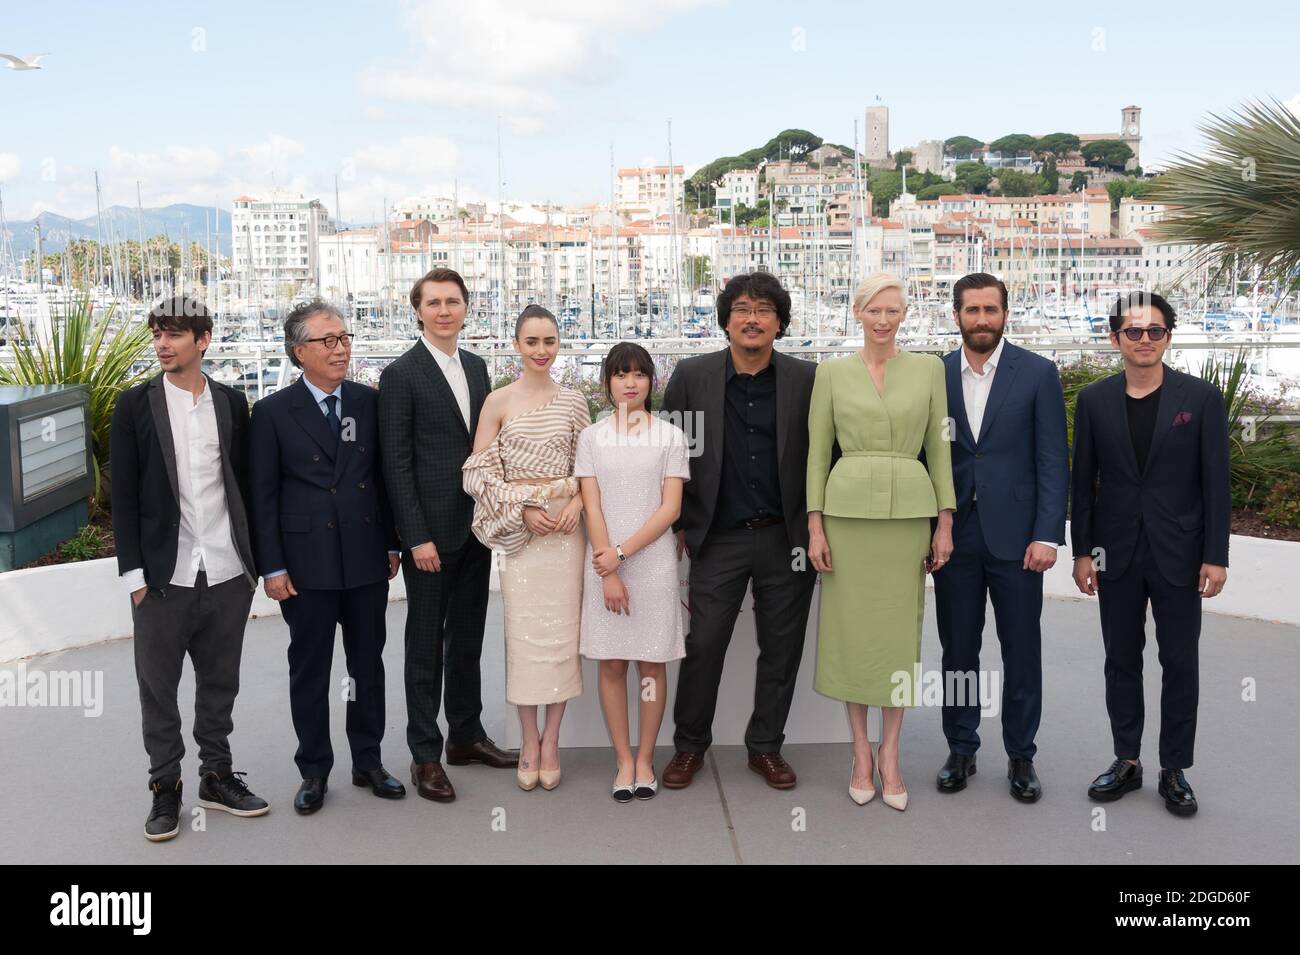 Director Joon-Ho Bong, Seo-Hyun Ahn, Tilda Swinton, Jake Gyllenhaal, Lily Collins, Paul Dano, Steven Yeun, Heebong Byung and Devon Bostick attending the 'Okja' photocall as part of the 70th Cannes Film Festival in Cannes, France on May 19, 2017. Photo by Nicolas Genin/ABACAPRESS.COM Stock Photo